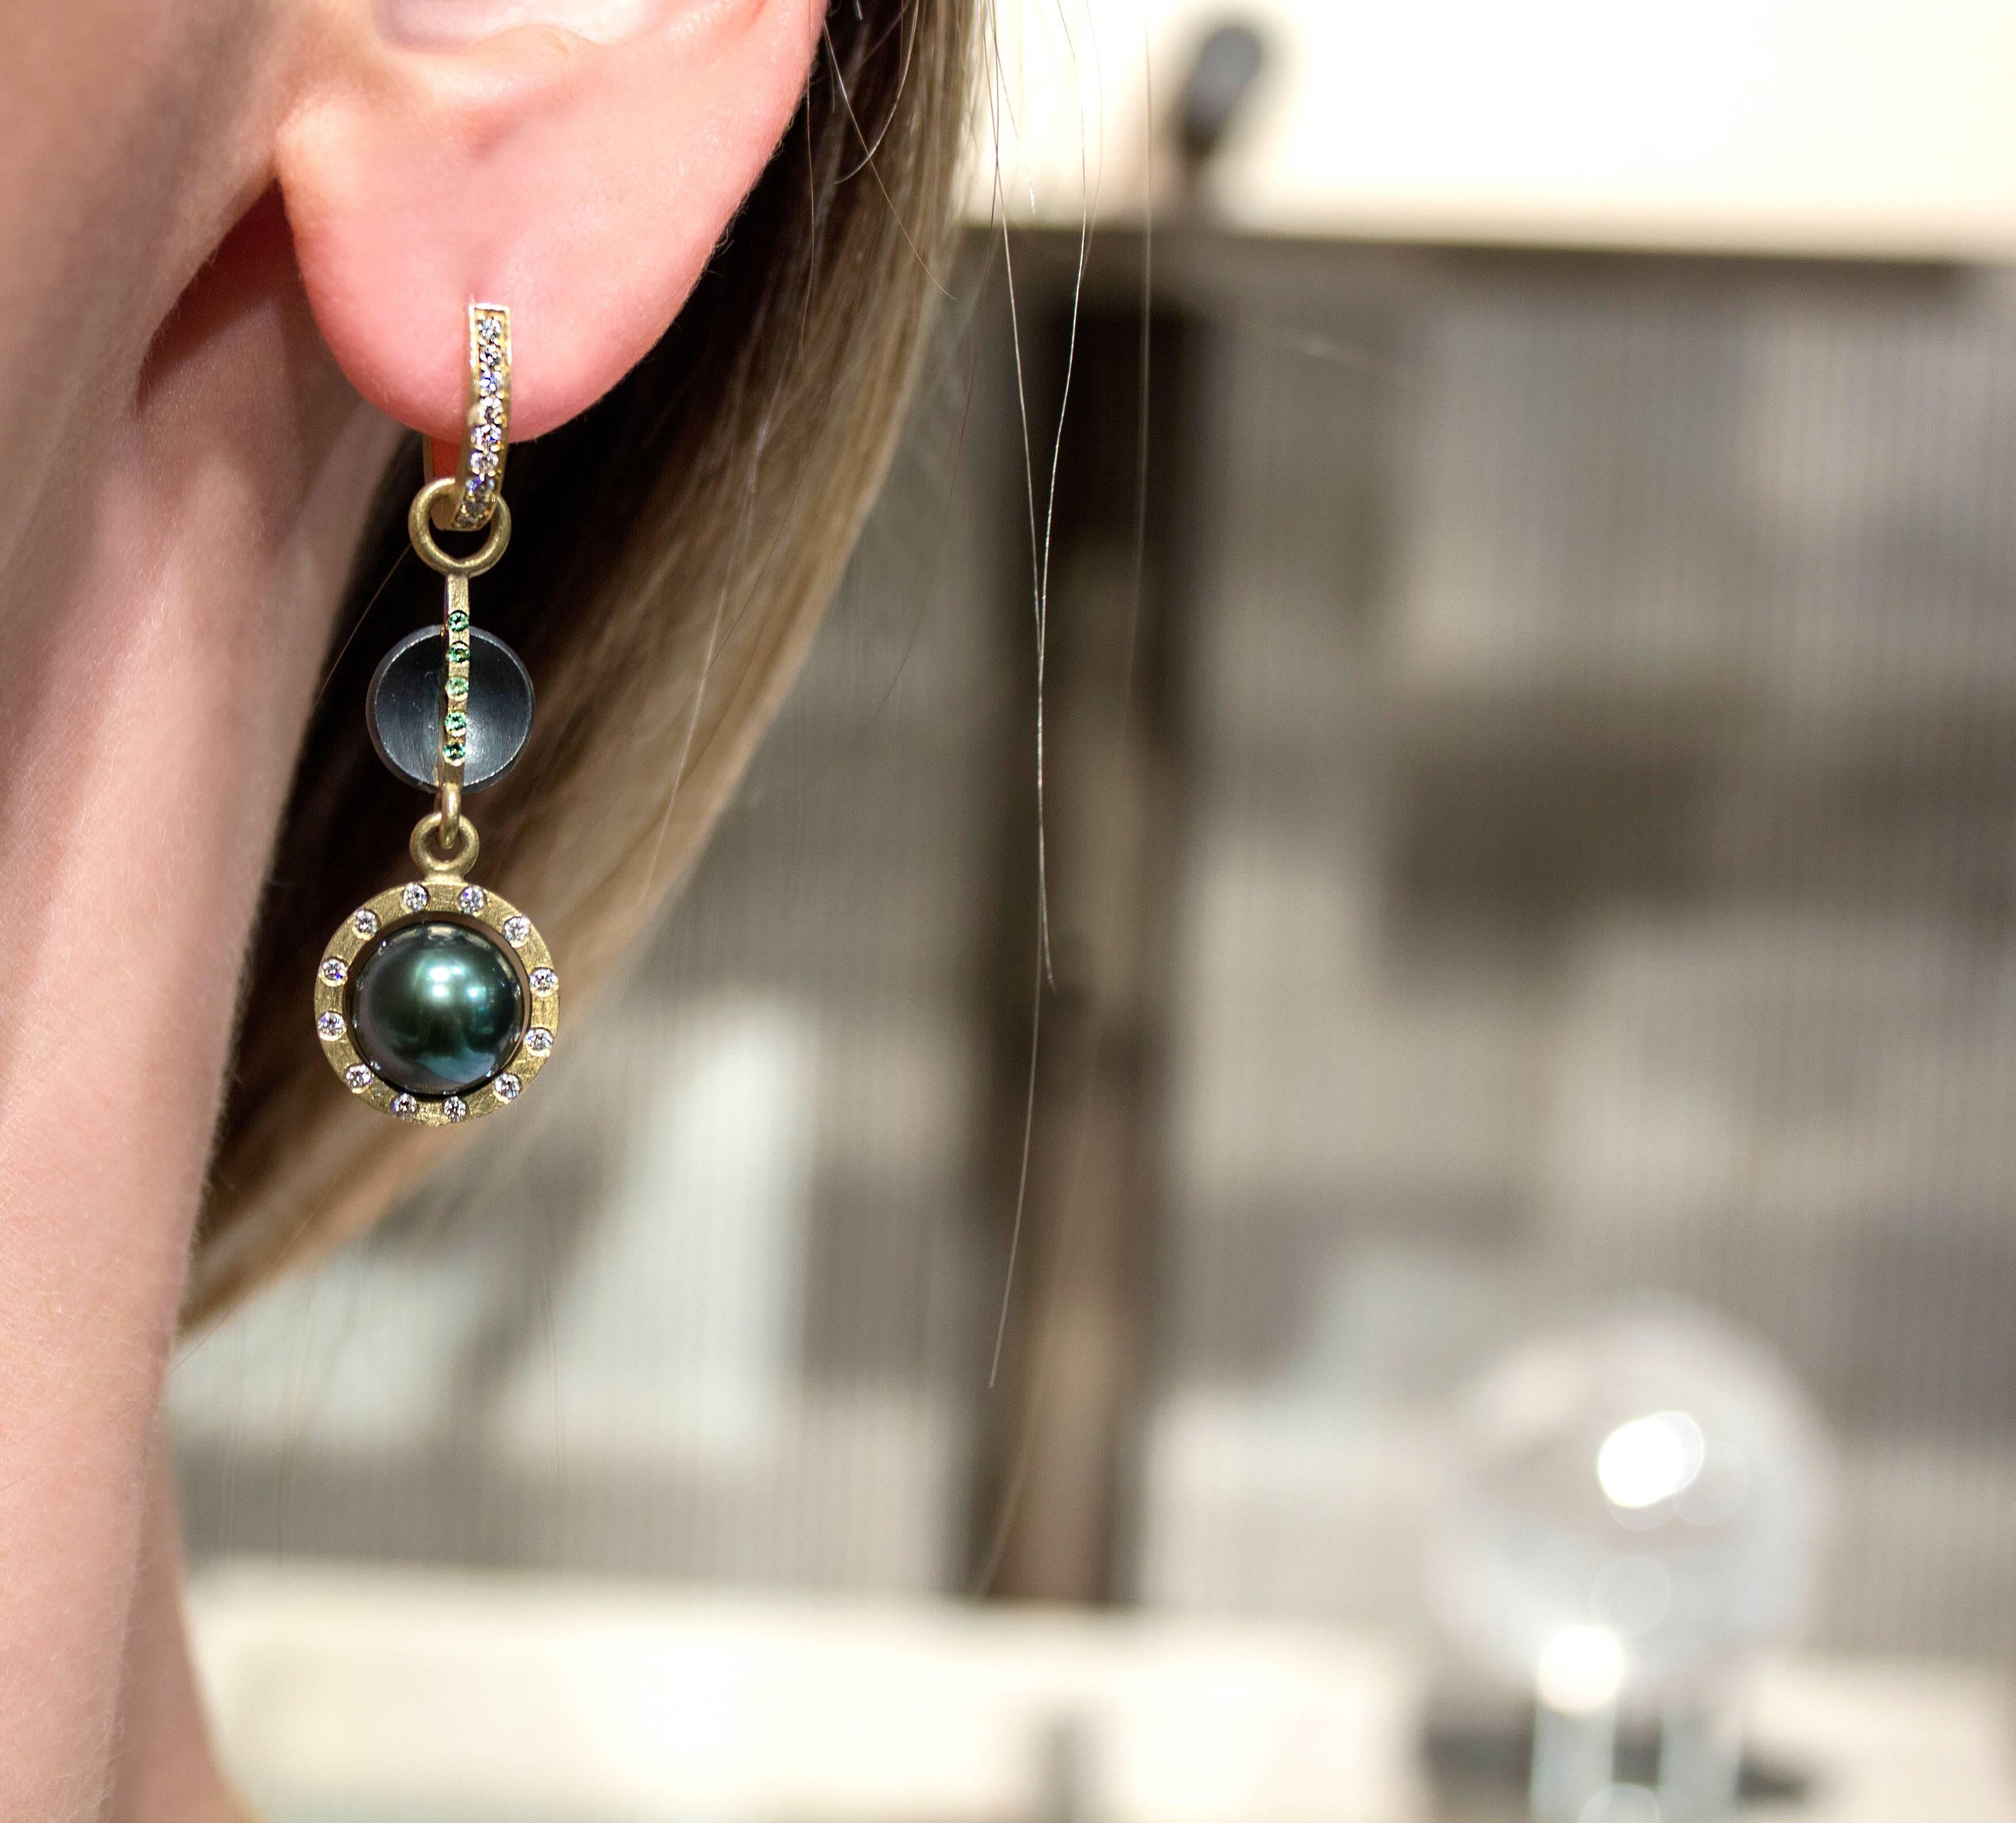 One of a Kind Earrings handcrafted by award-winning jewelry designer Robin Waynee with detachable drops featuring a lustrous matched pair of 9.25mm deep green peacock Tahitian pearls surrounded by 0.24 total carats of round brilliant-cut F/vs1